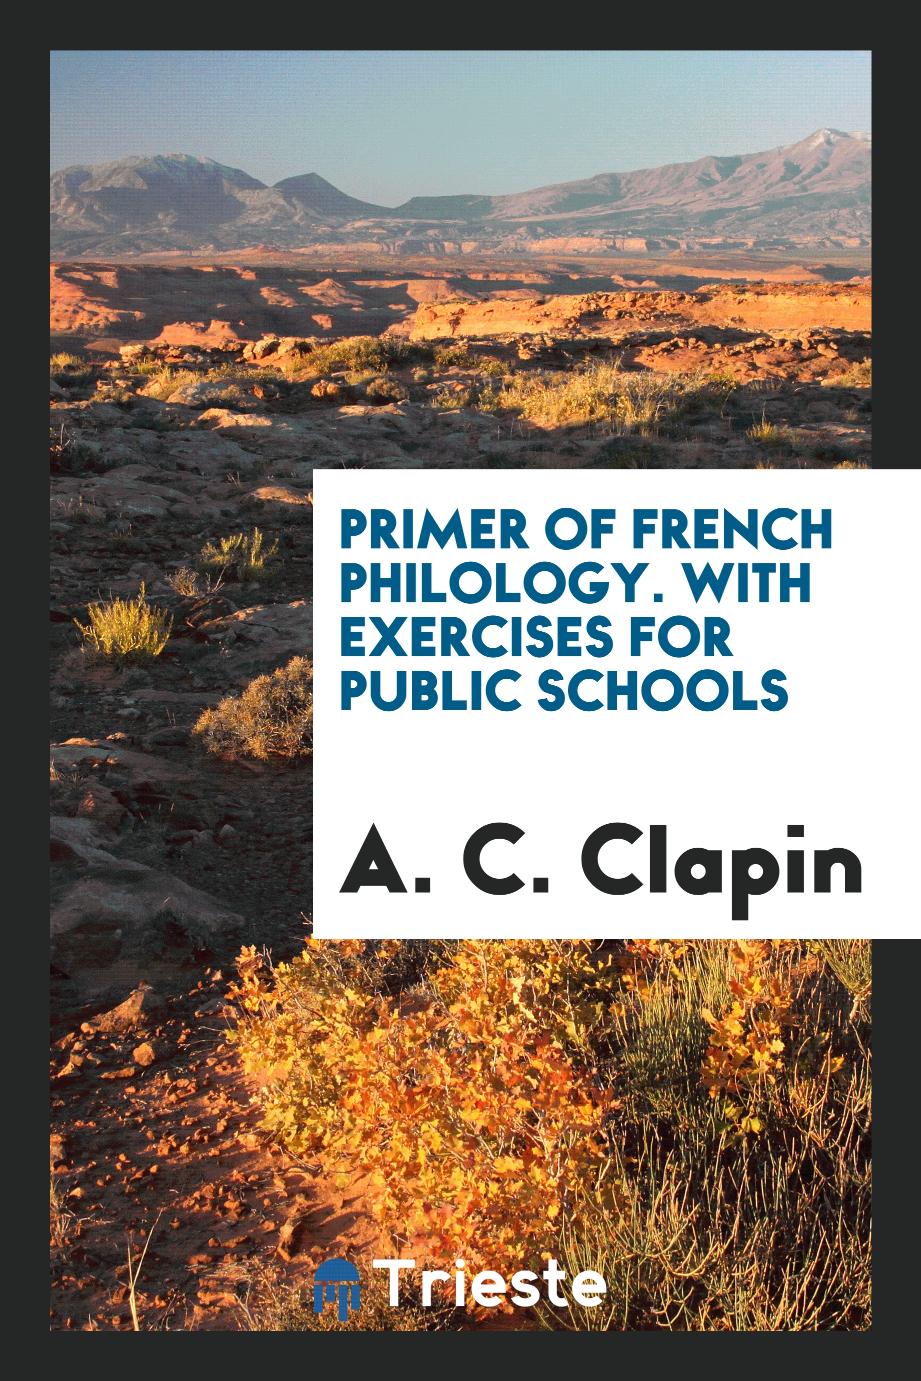 Primer of French philology. With exercises for public schools